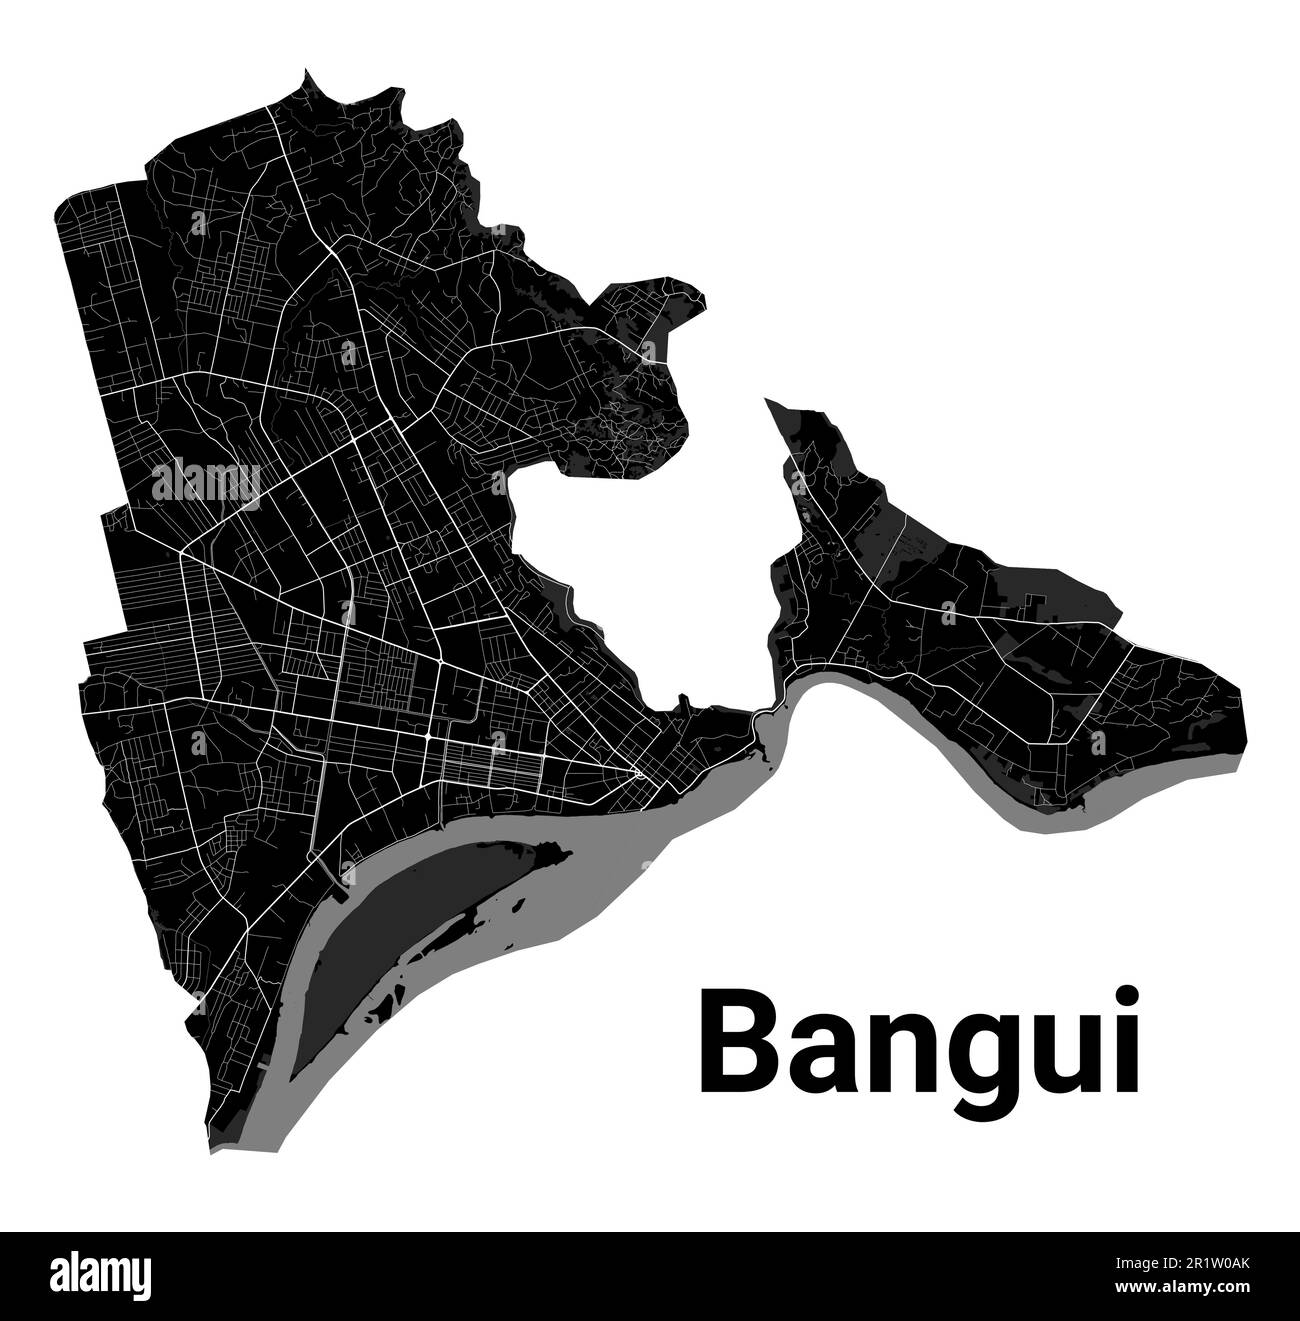 Bangui, Central African Republic map. Detailed black map of Bangui city administrative area. Cityscape poster metropolitan aria view. Black land with Stock Vector